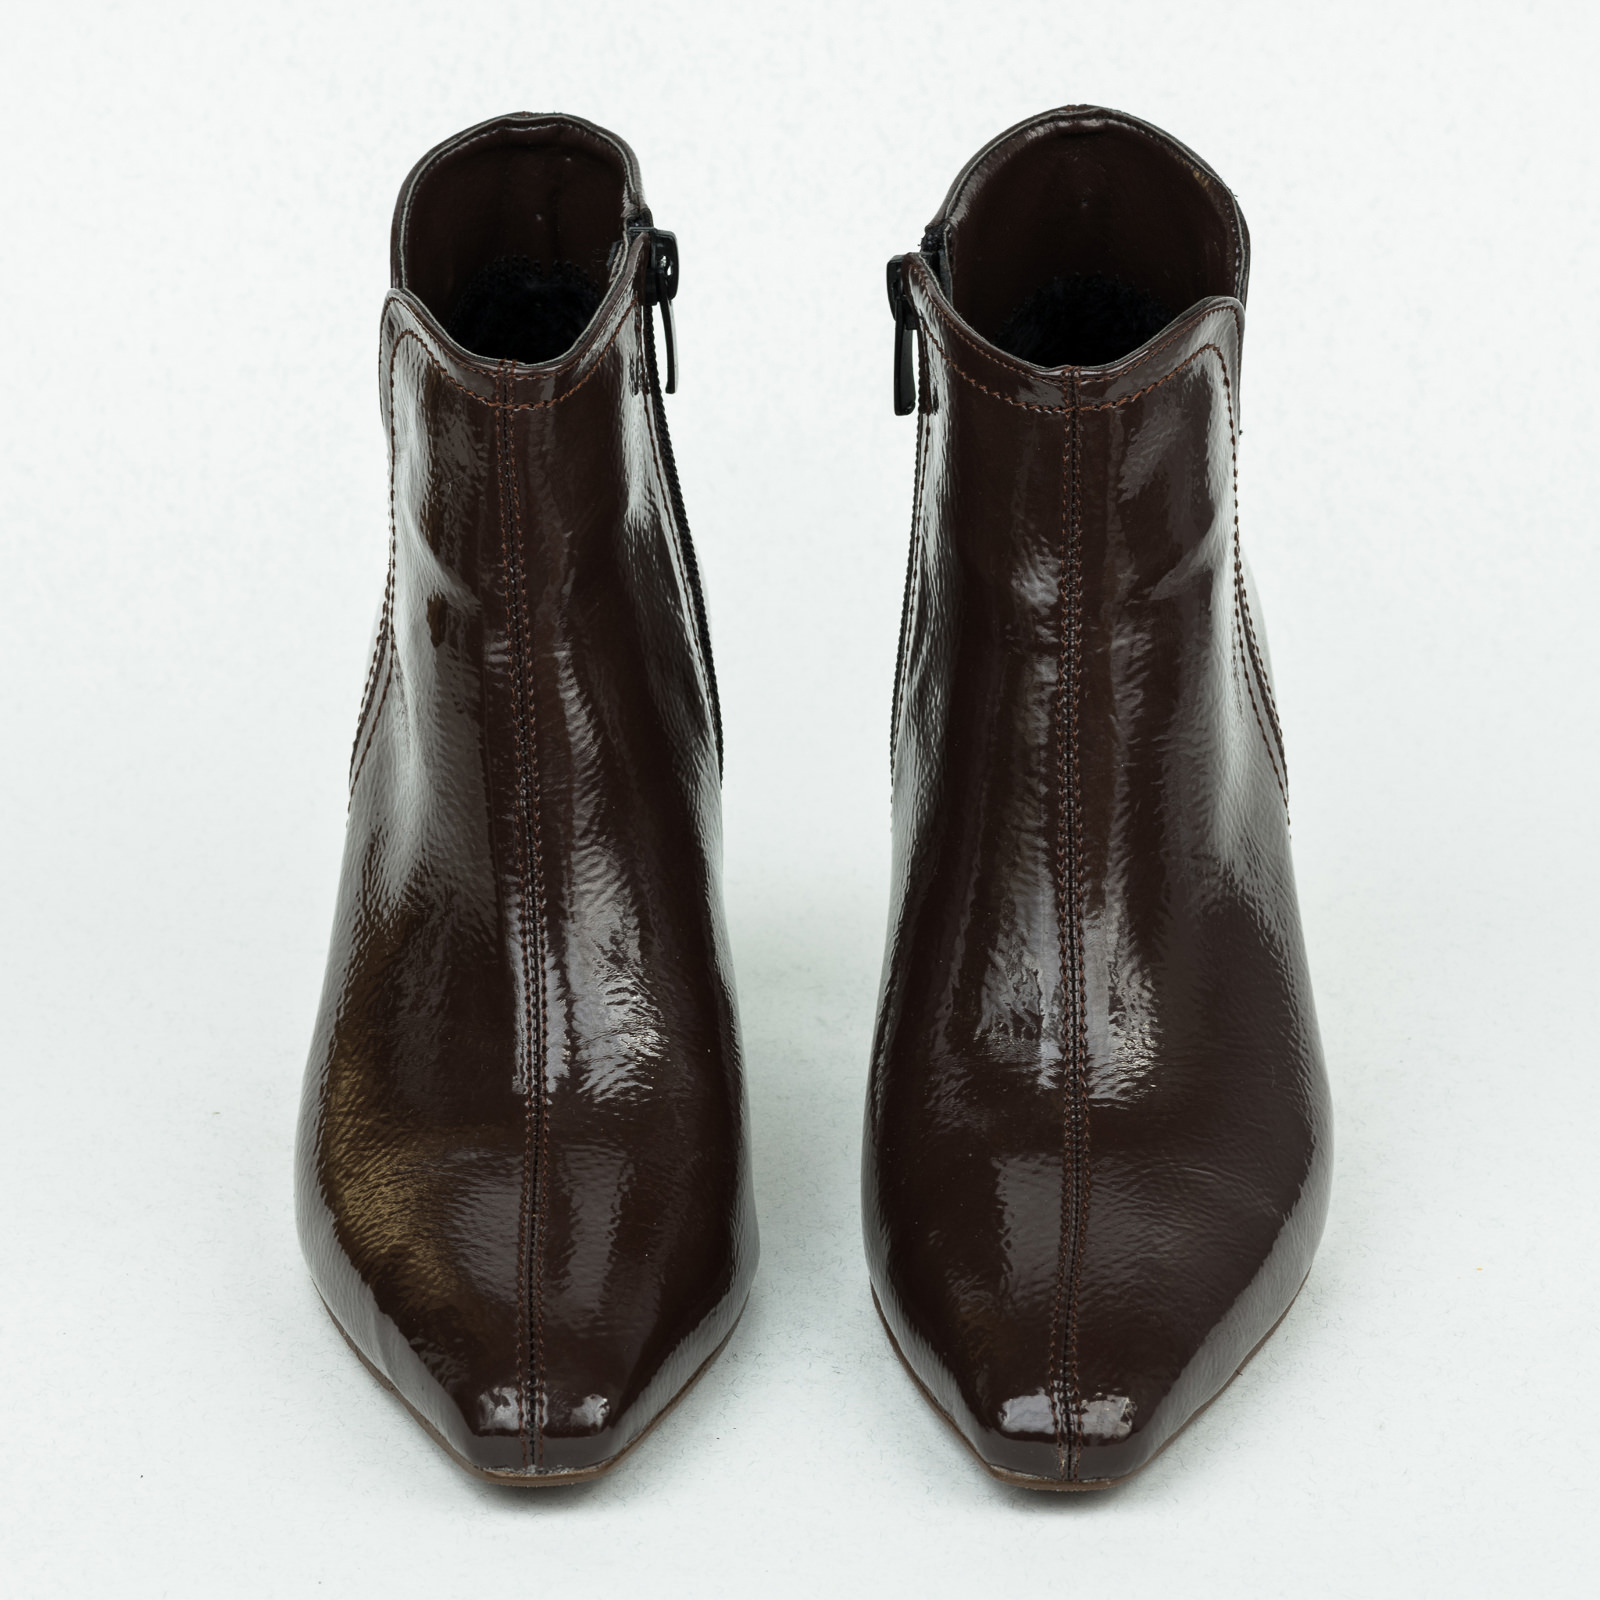 Women ankle boots B165 - BROWN